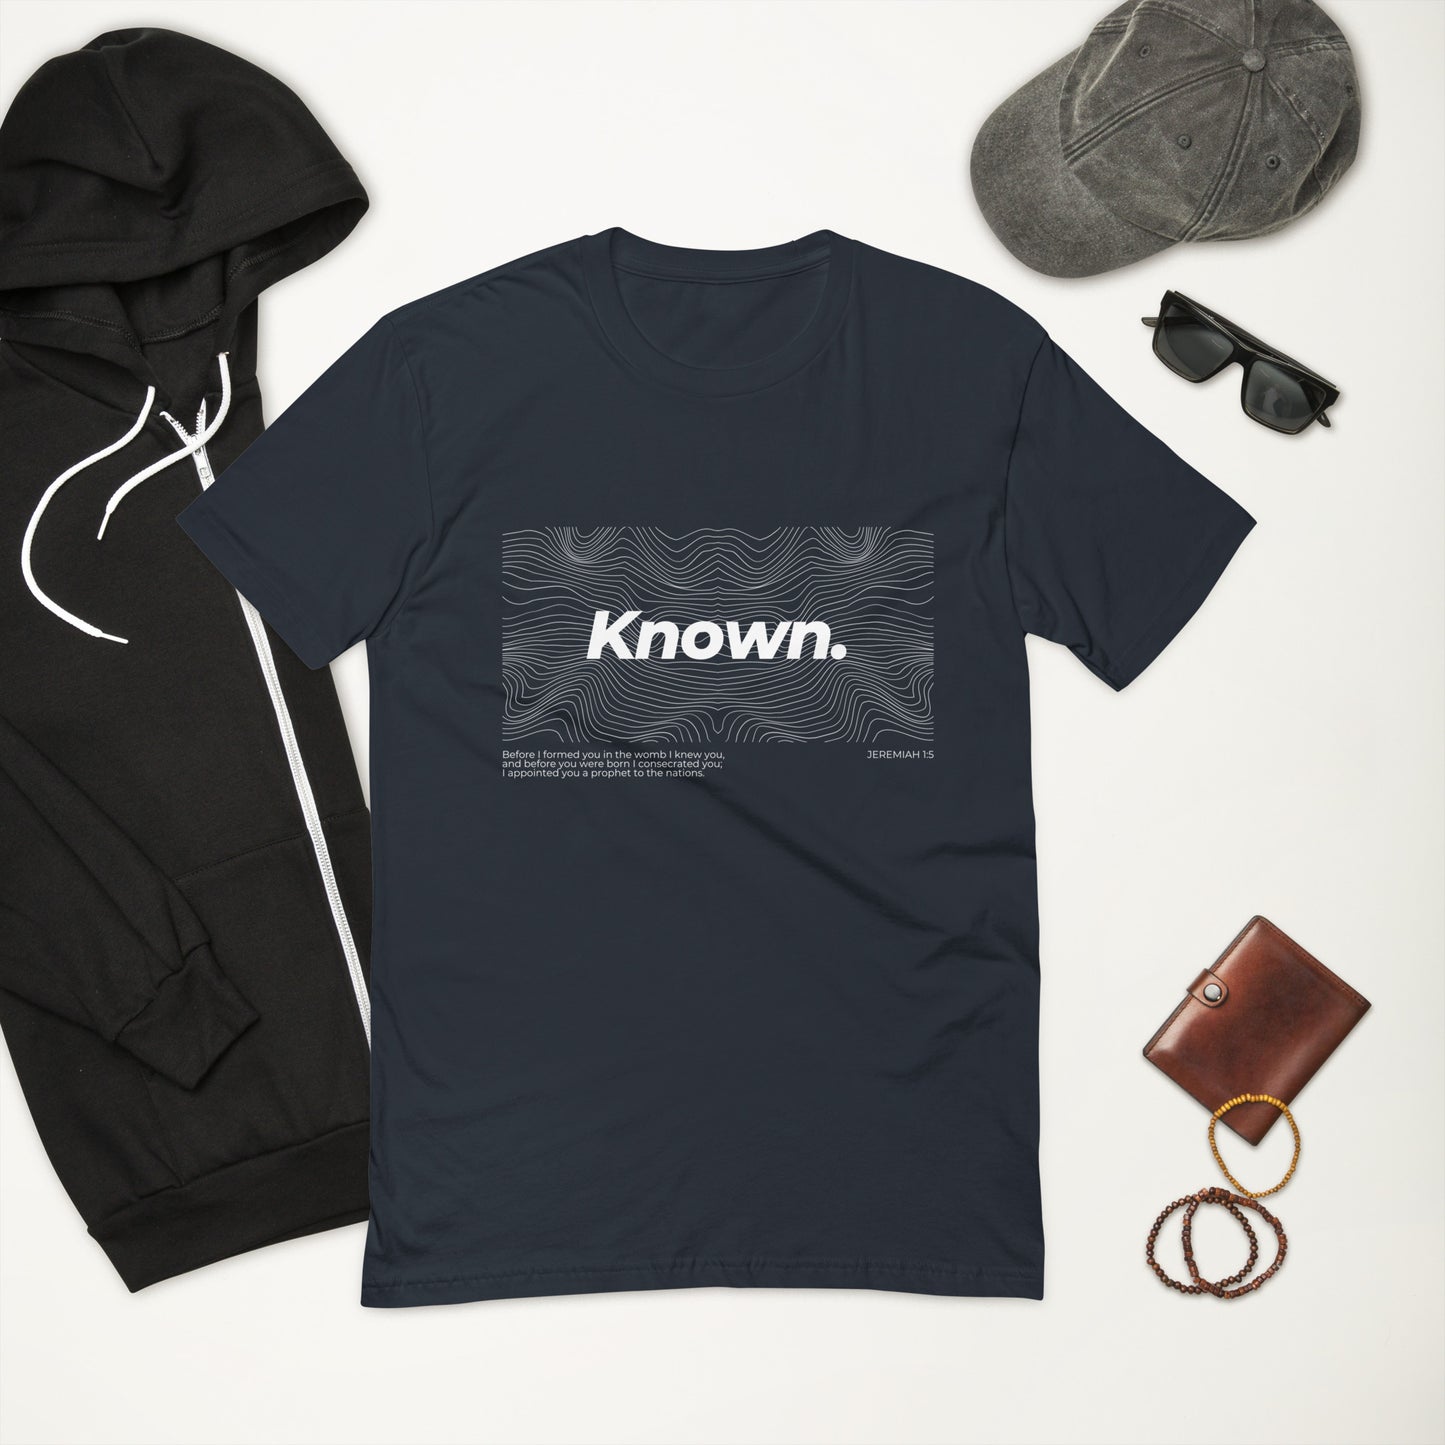 "Known" - Short Sleeve T-shirt